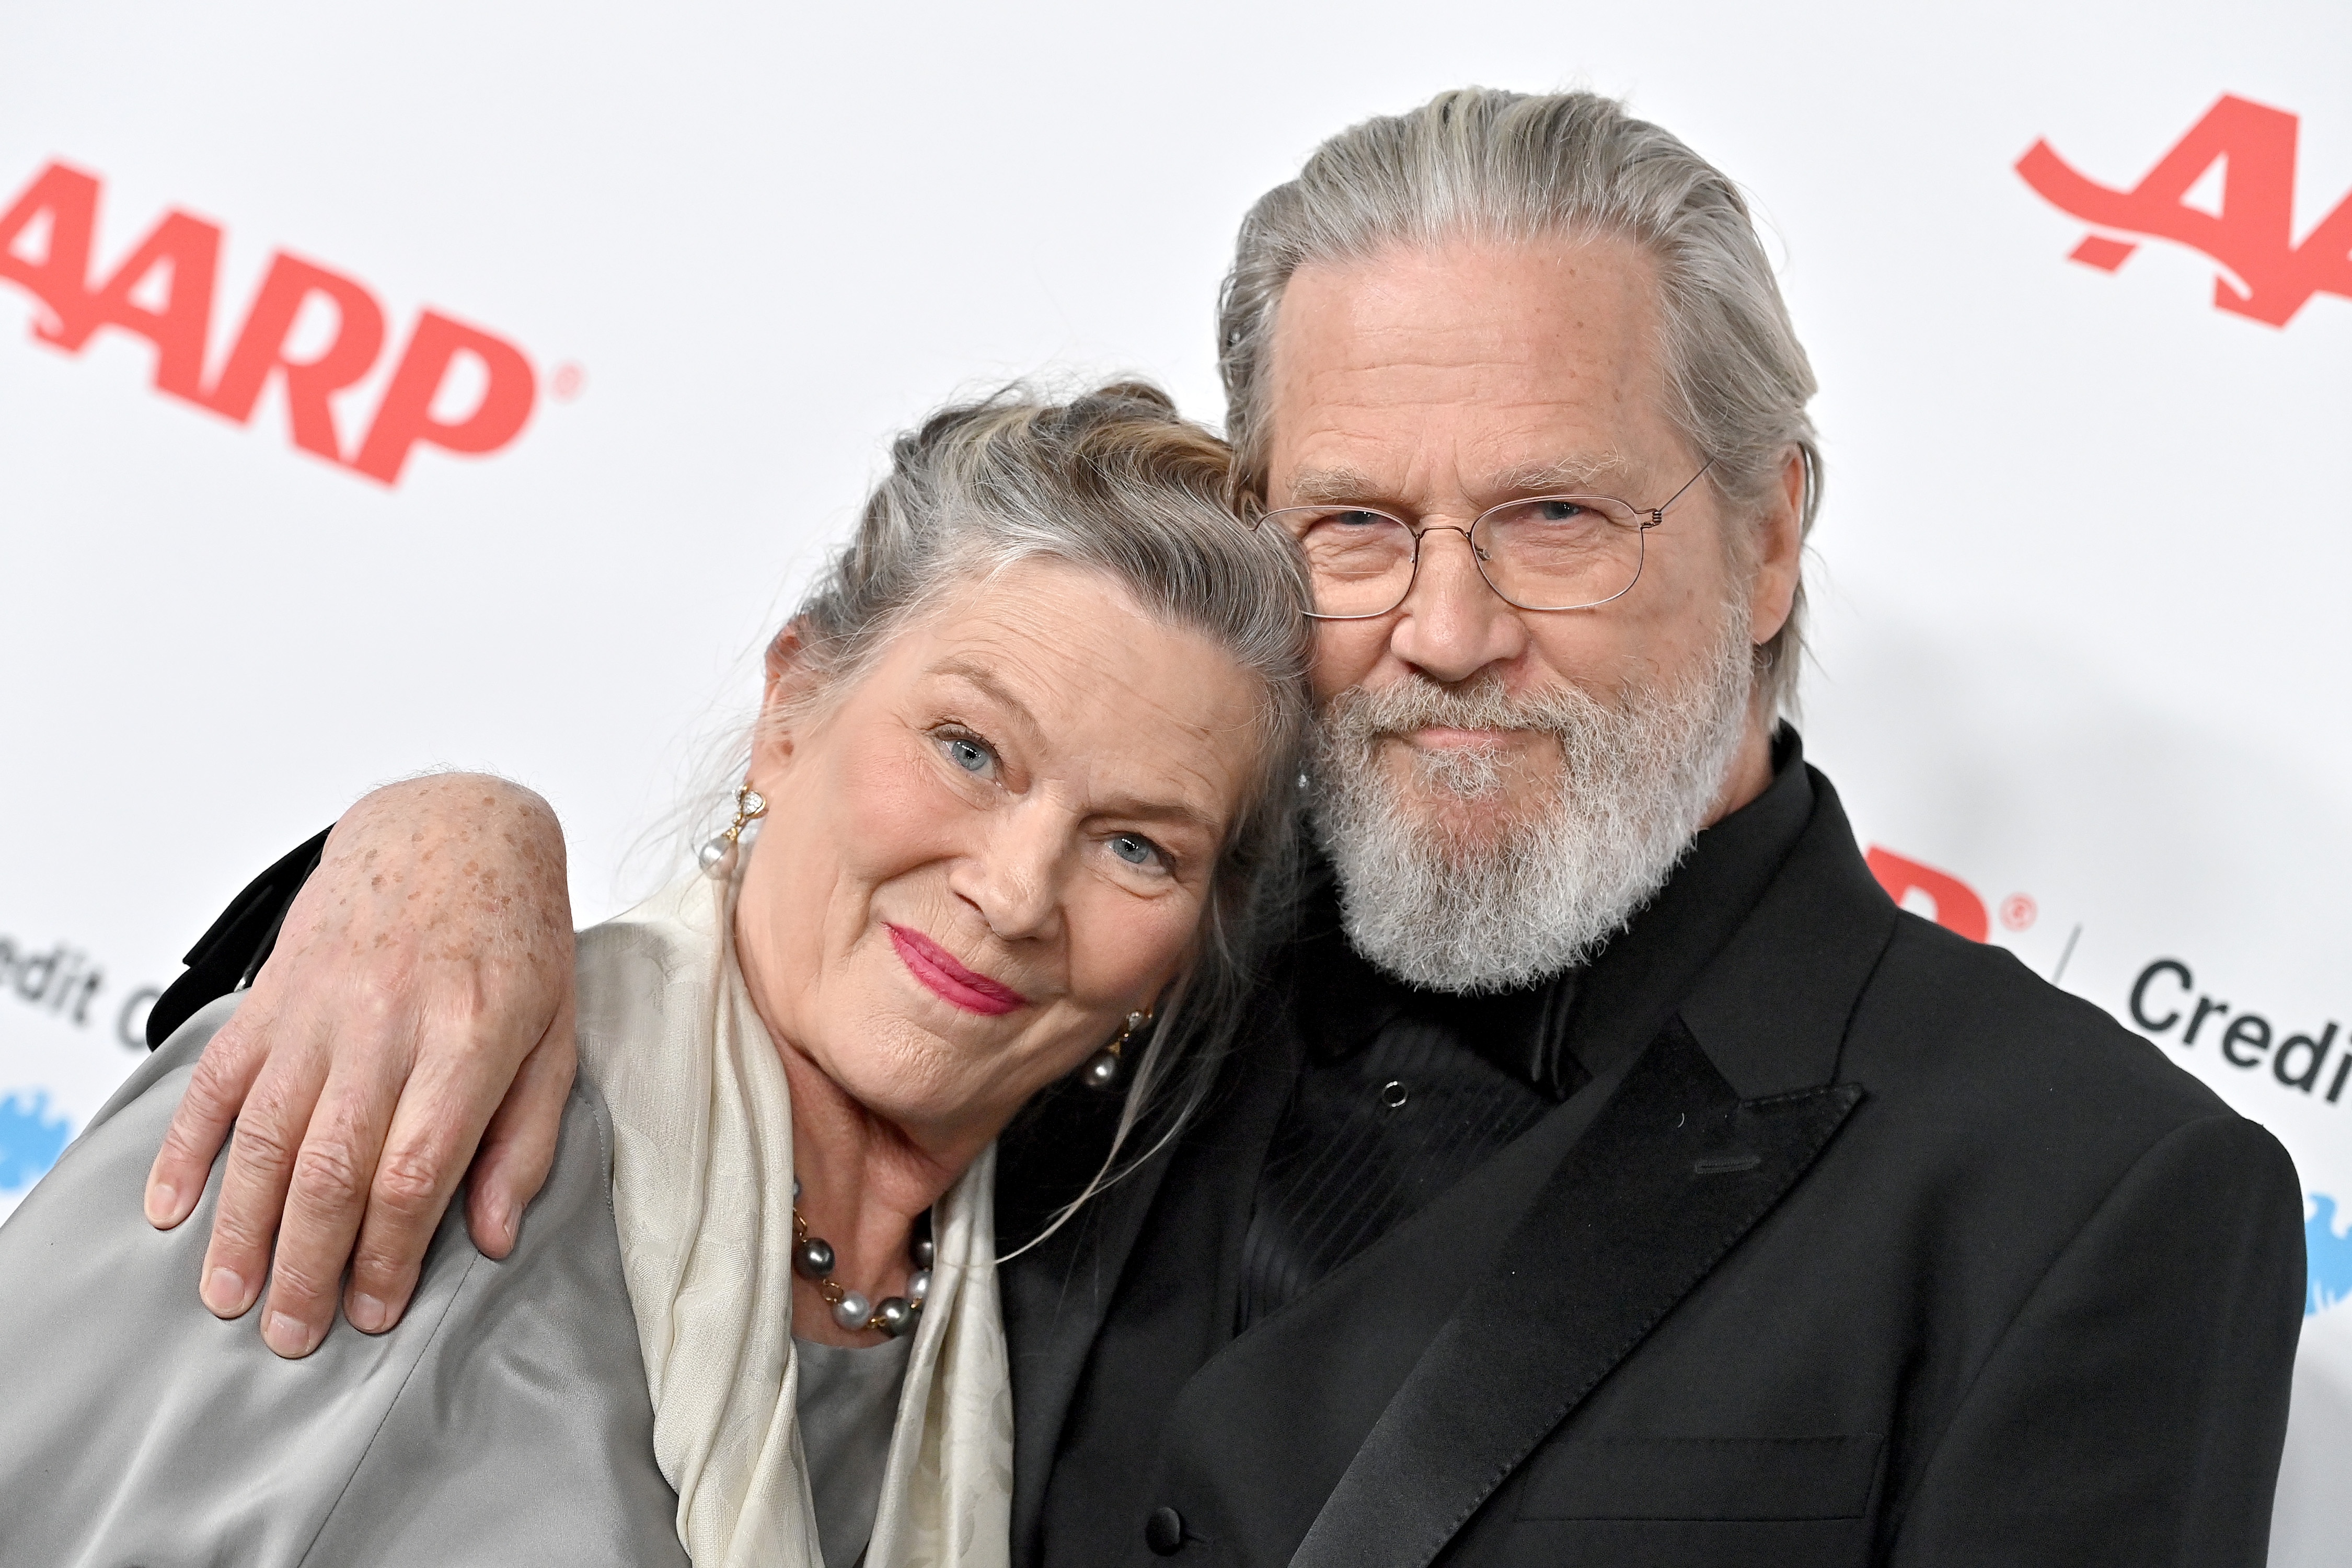 Susan and Jeff Bridges attend the "AARP The Magazine's" 21st Annual Movies For Grownups Awards in Beverly Hills, California, on January 28, 2023. | Source: Getty Images